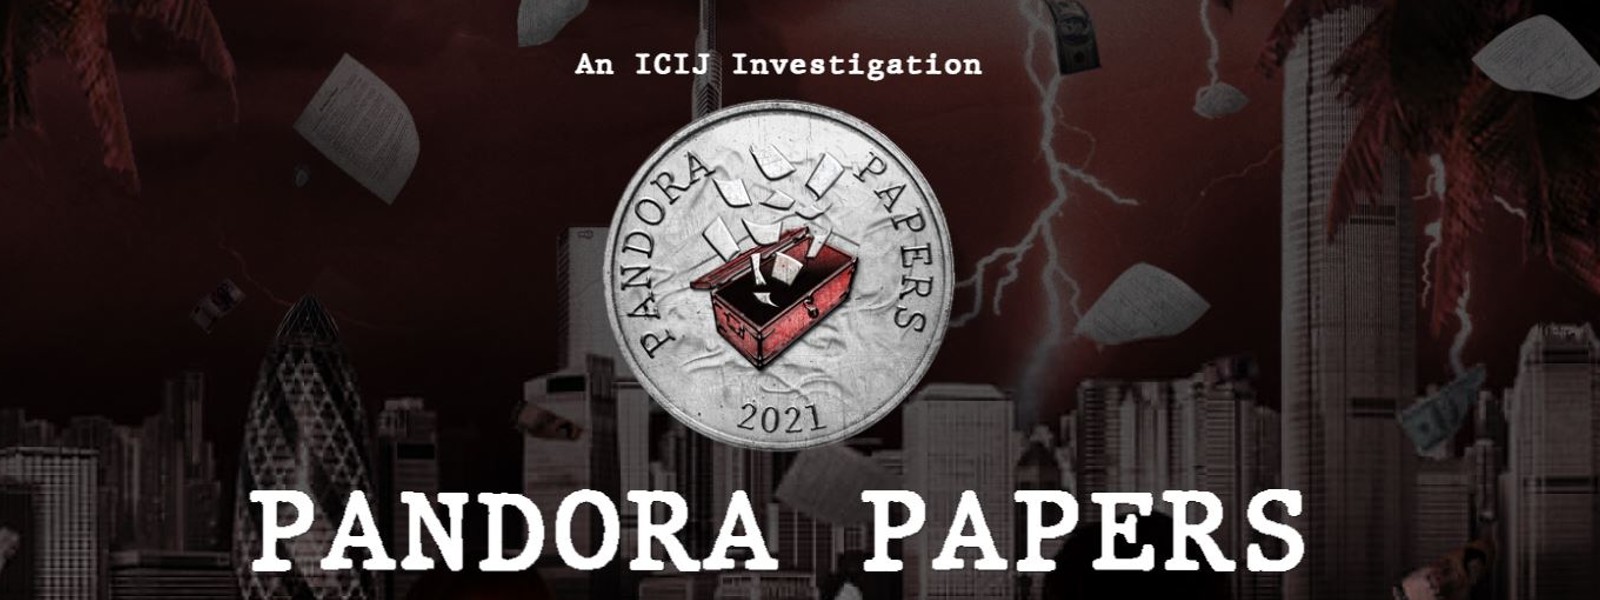 #PandoraPapers : Expose everyone linked to the allegations, says SJB